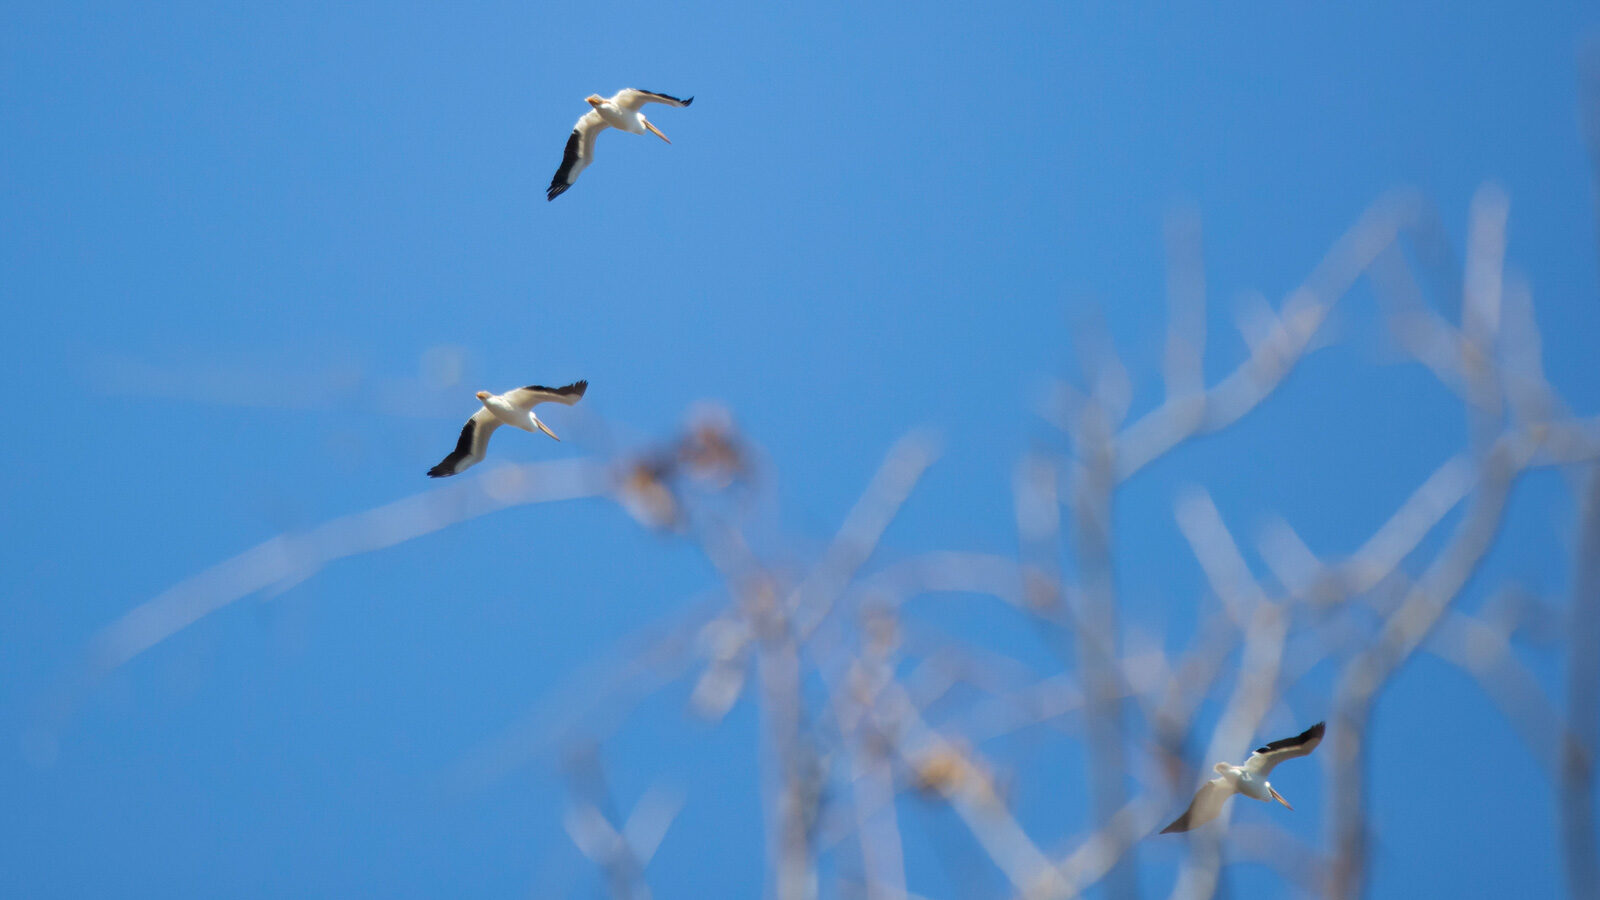 American white pelicans flying in a blue sky